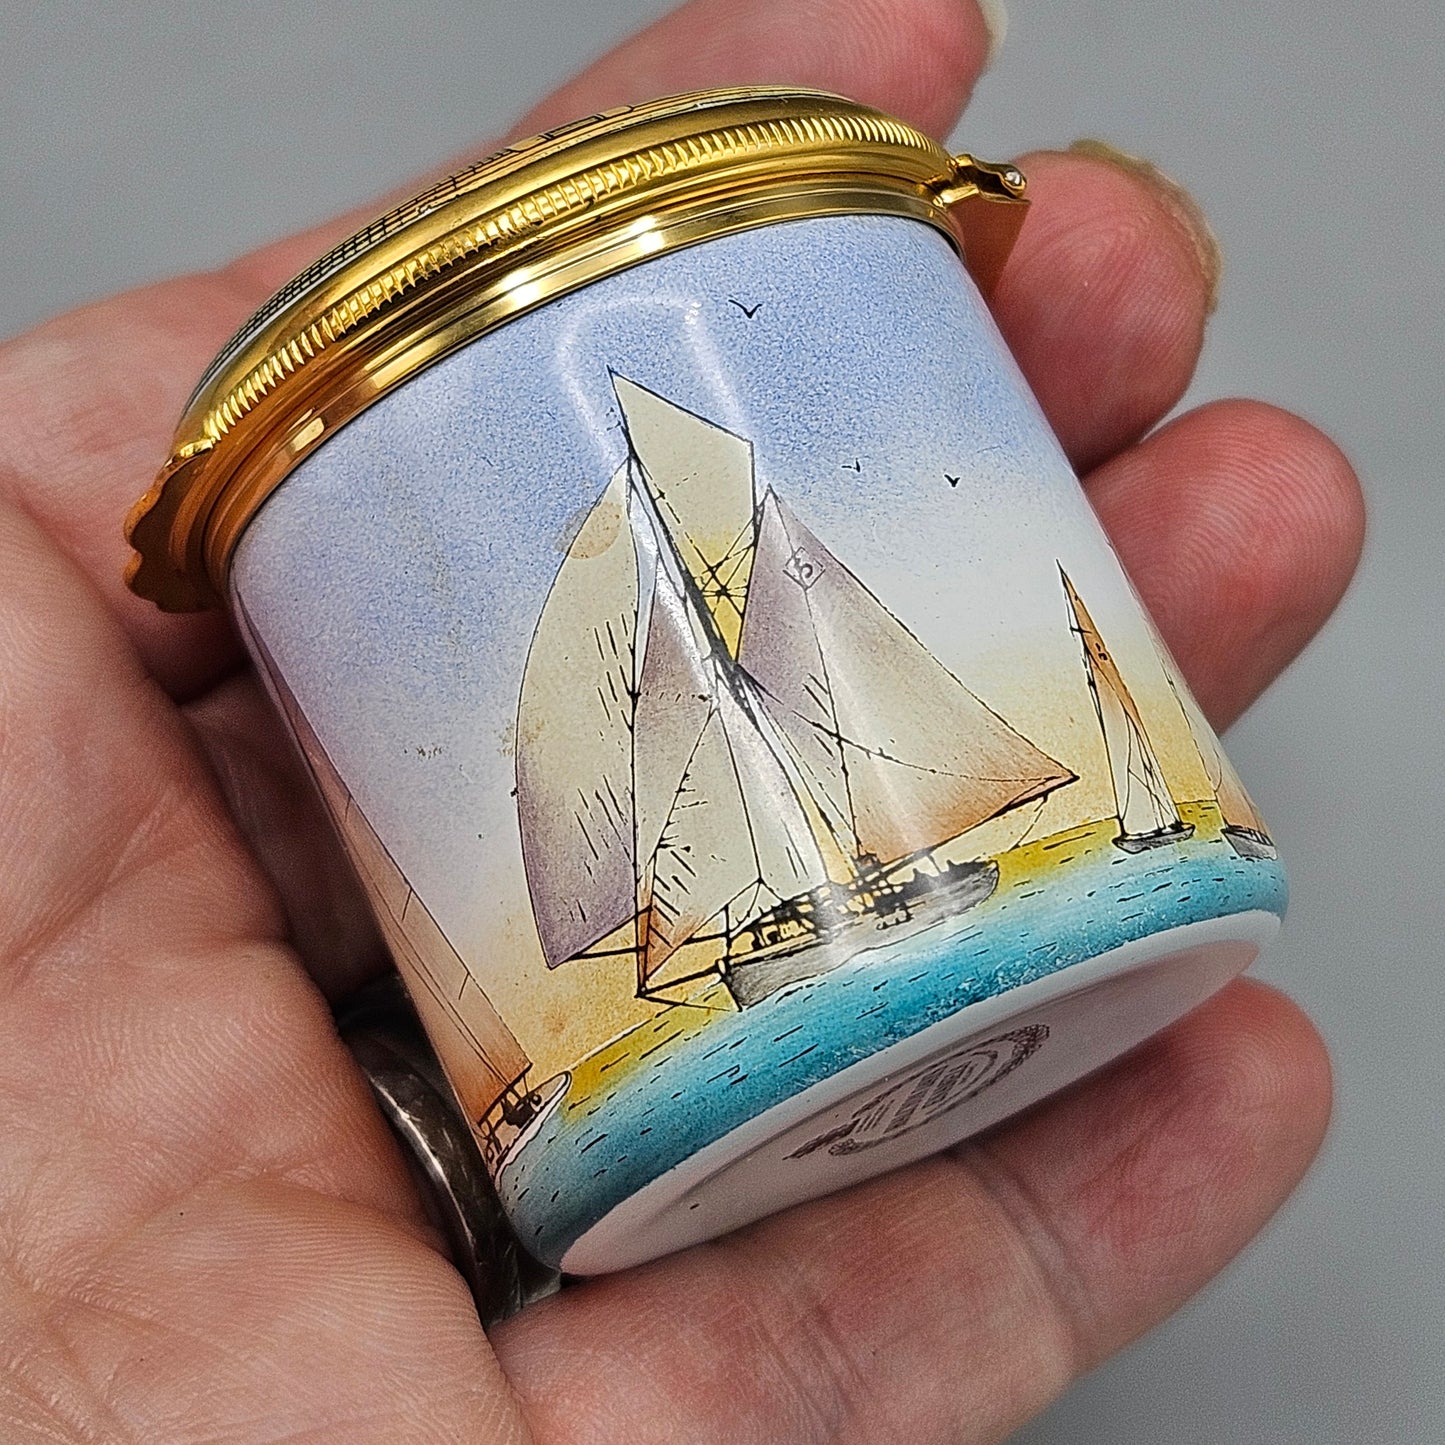 Vintage Halcyon Days Sea Fever Trinket Box "I Must Go Down to the Sea Again..."